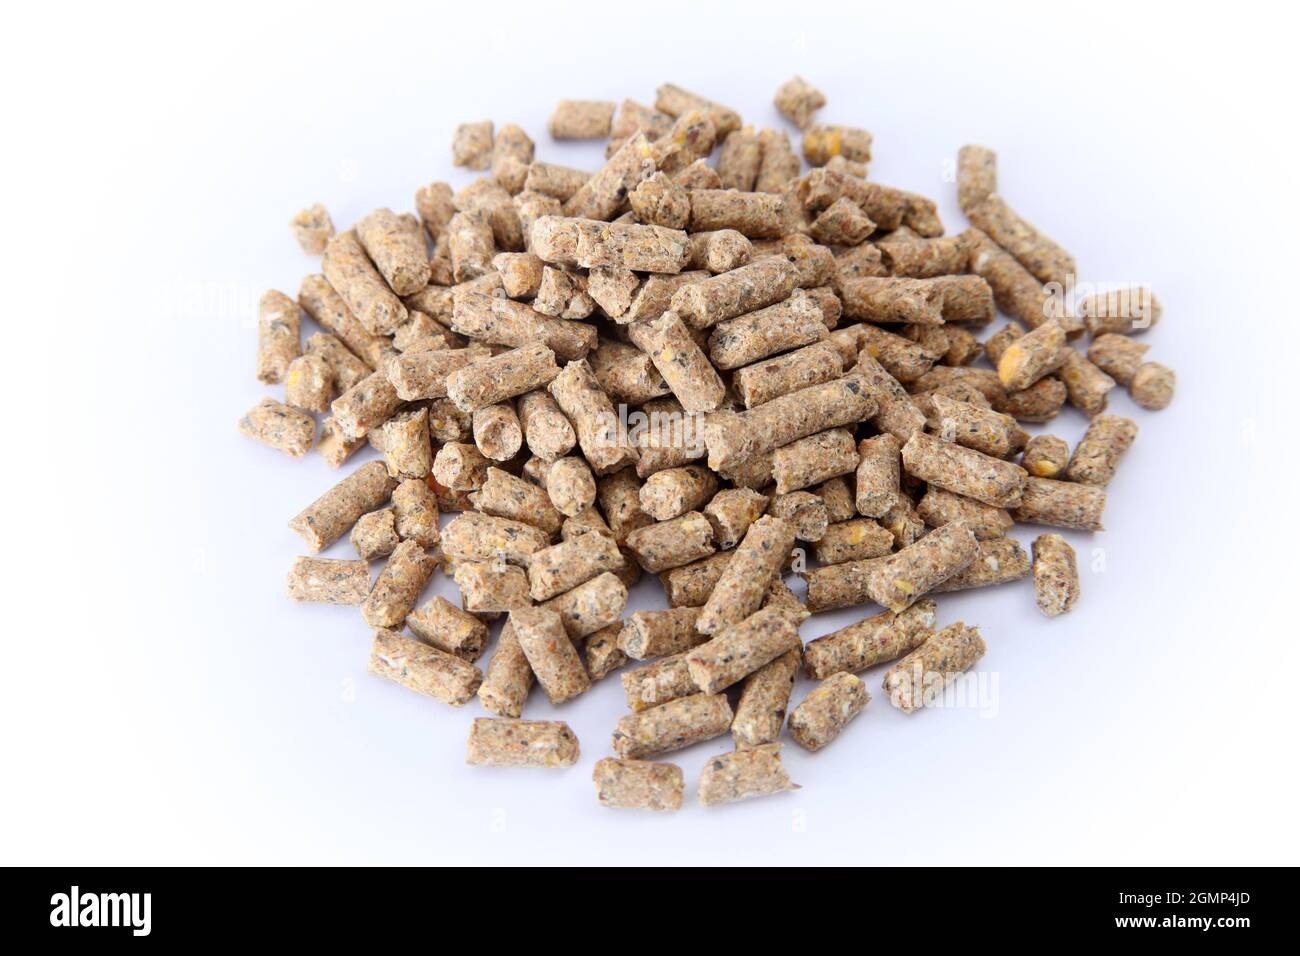 Pile of compound feed pellets isolated on white.   Animal feed. Stock Photo